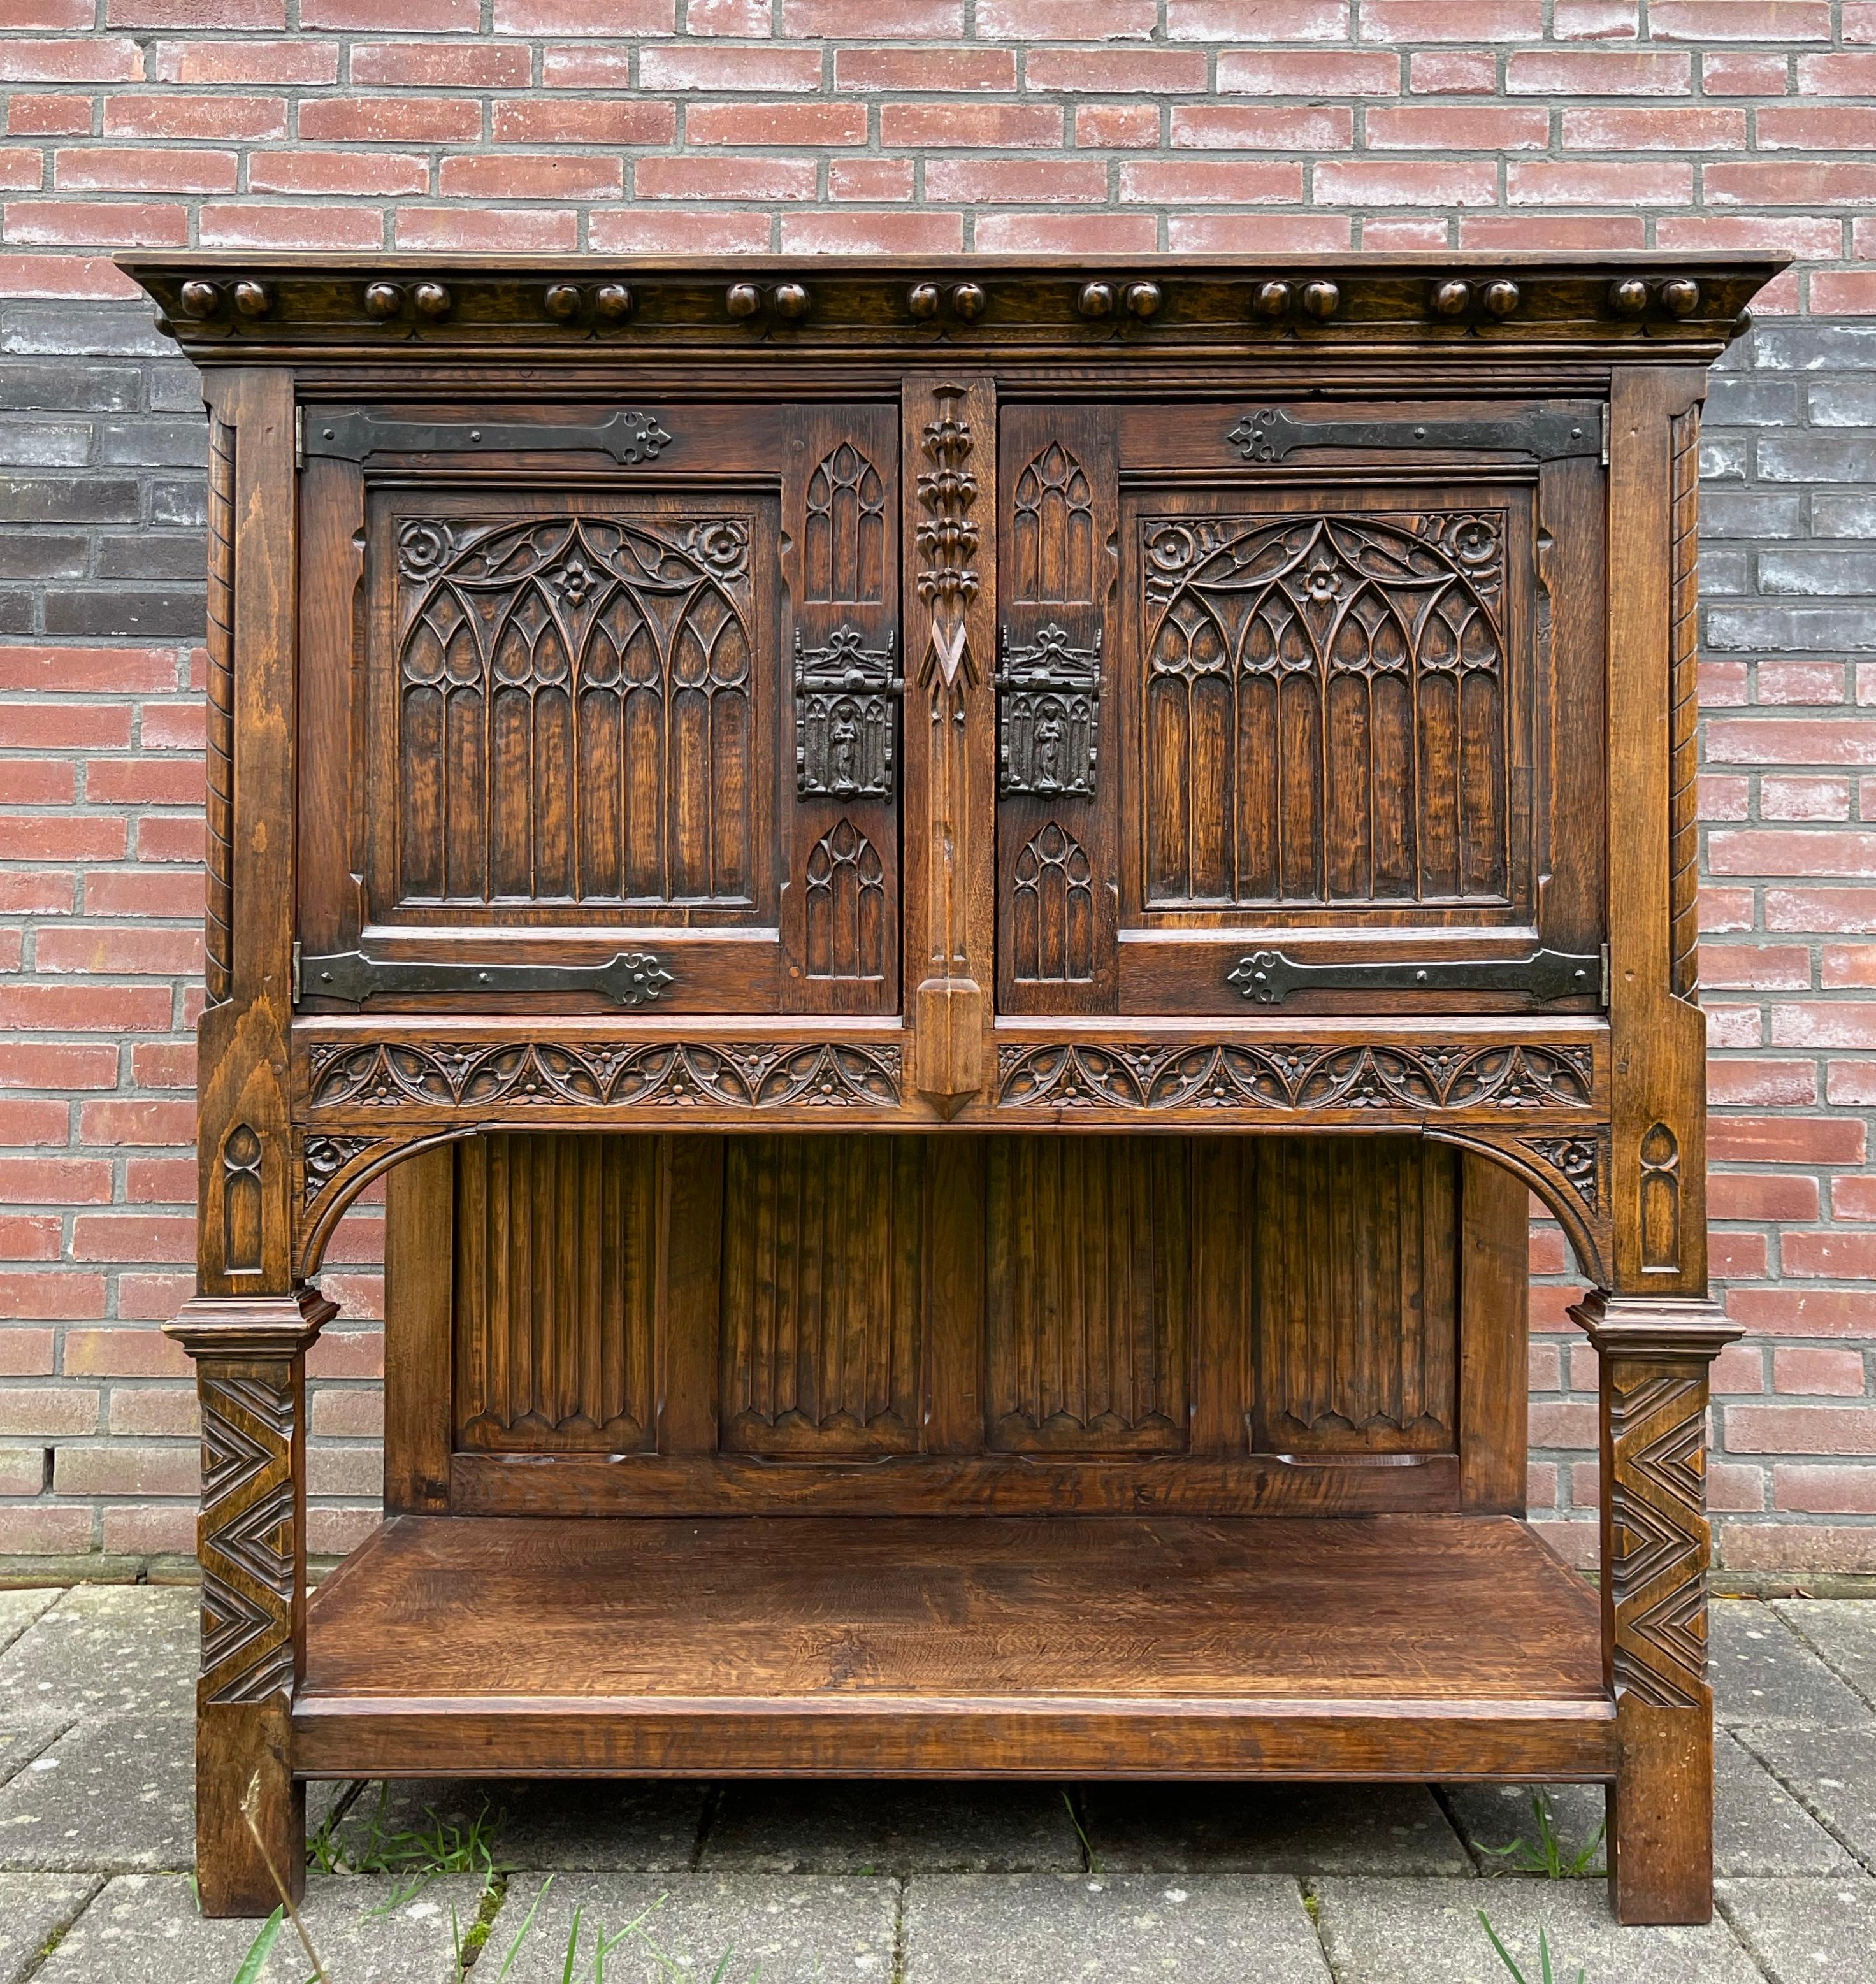 Tiger oak Gothic cabinet standing high on its feet.

This beautifully and deeply carved tiger oak cabinet from the early 1900s is in excellent condition. It comes with top quality, hand carved details and the warmest ever patina. This handcrafted